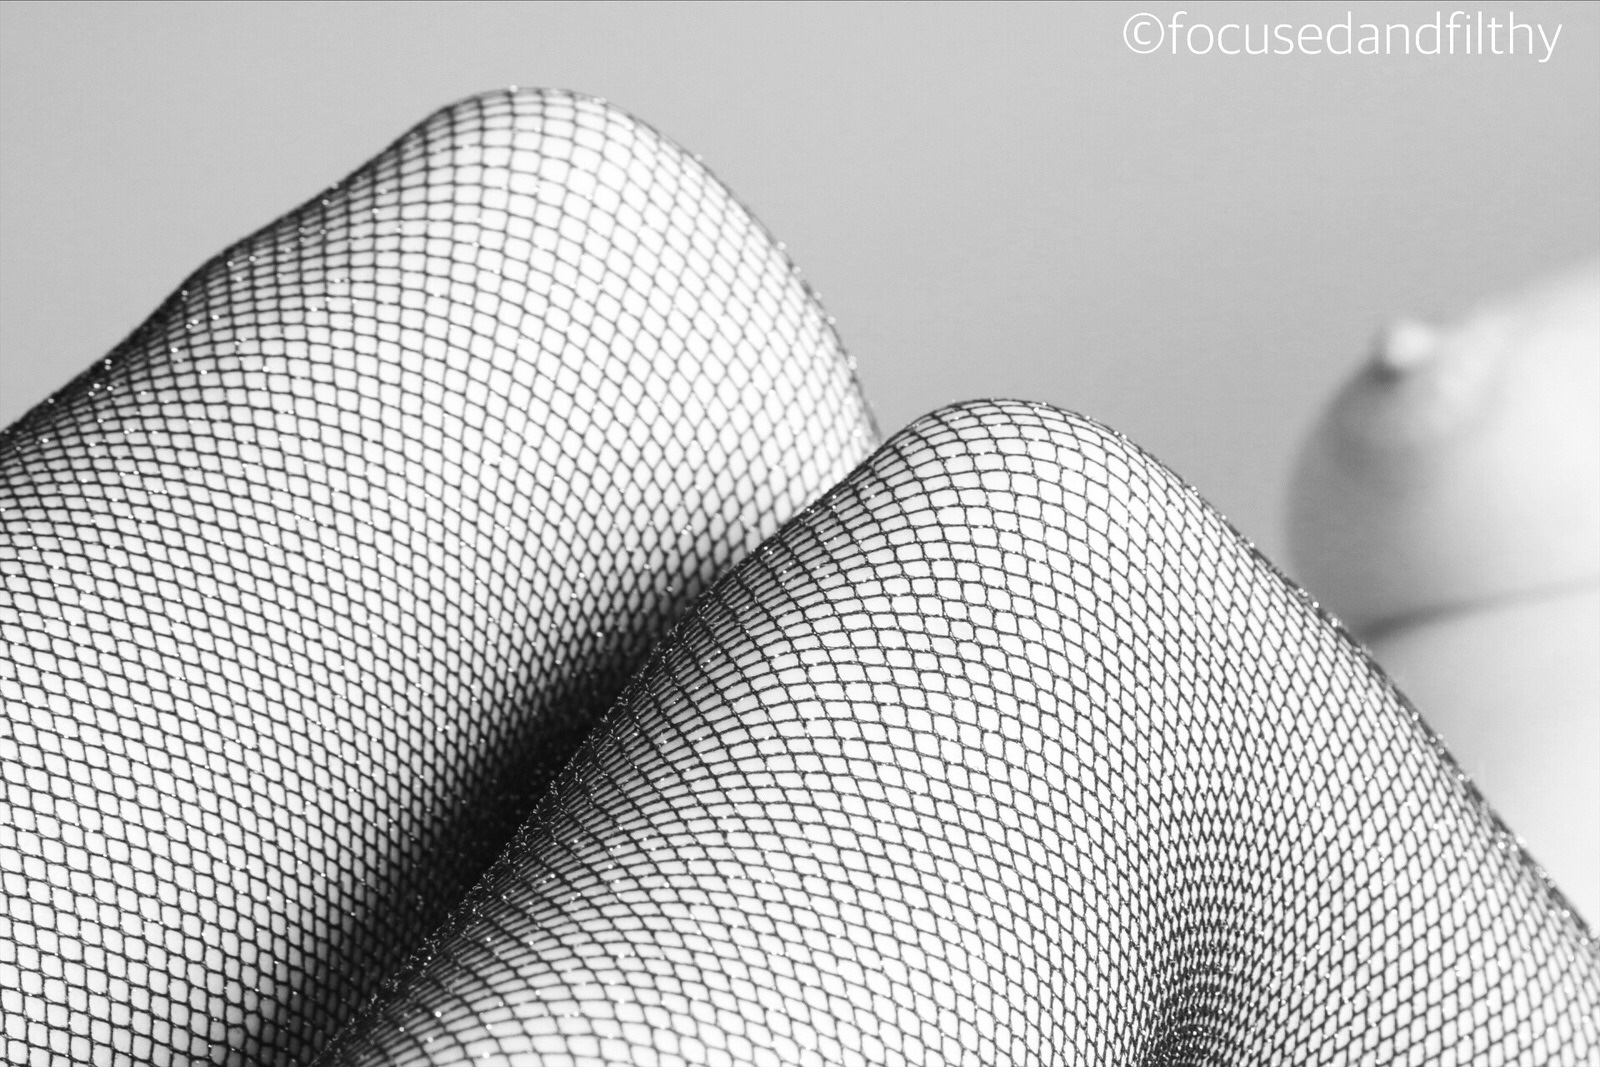 Only fishnets